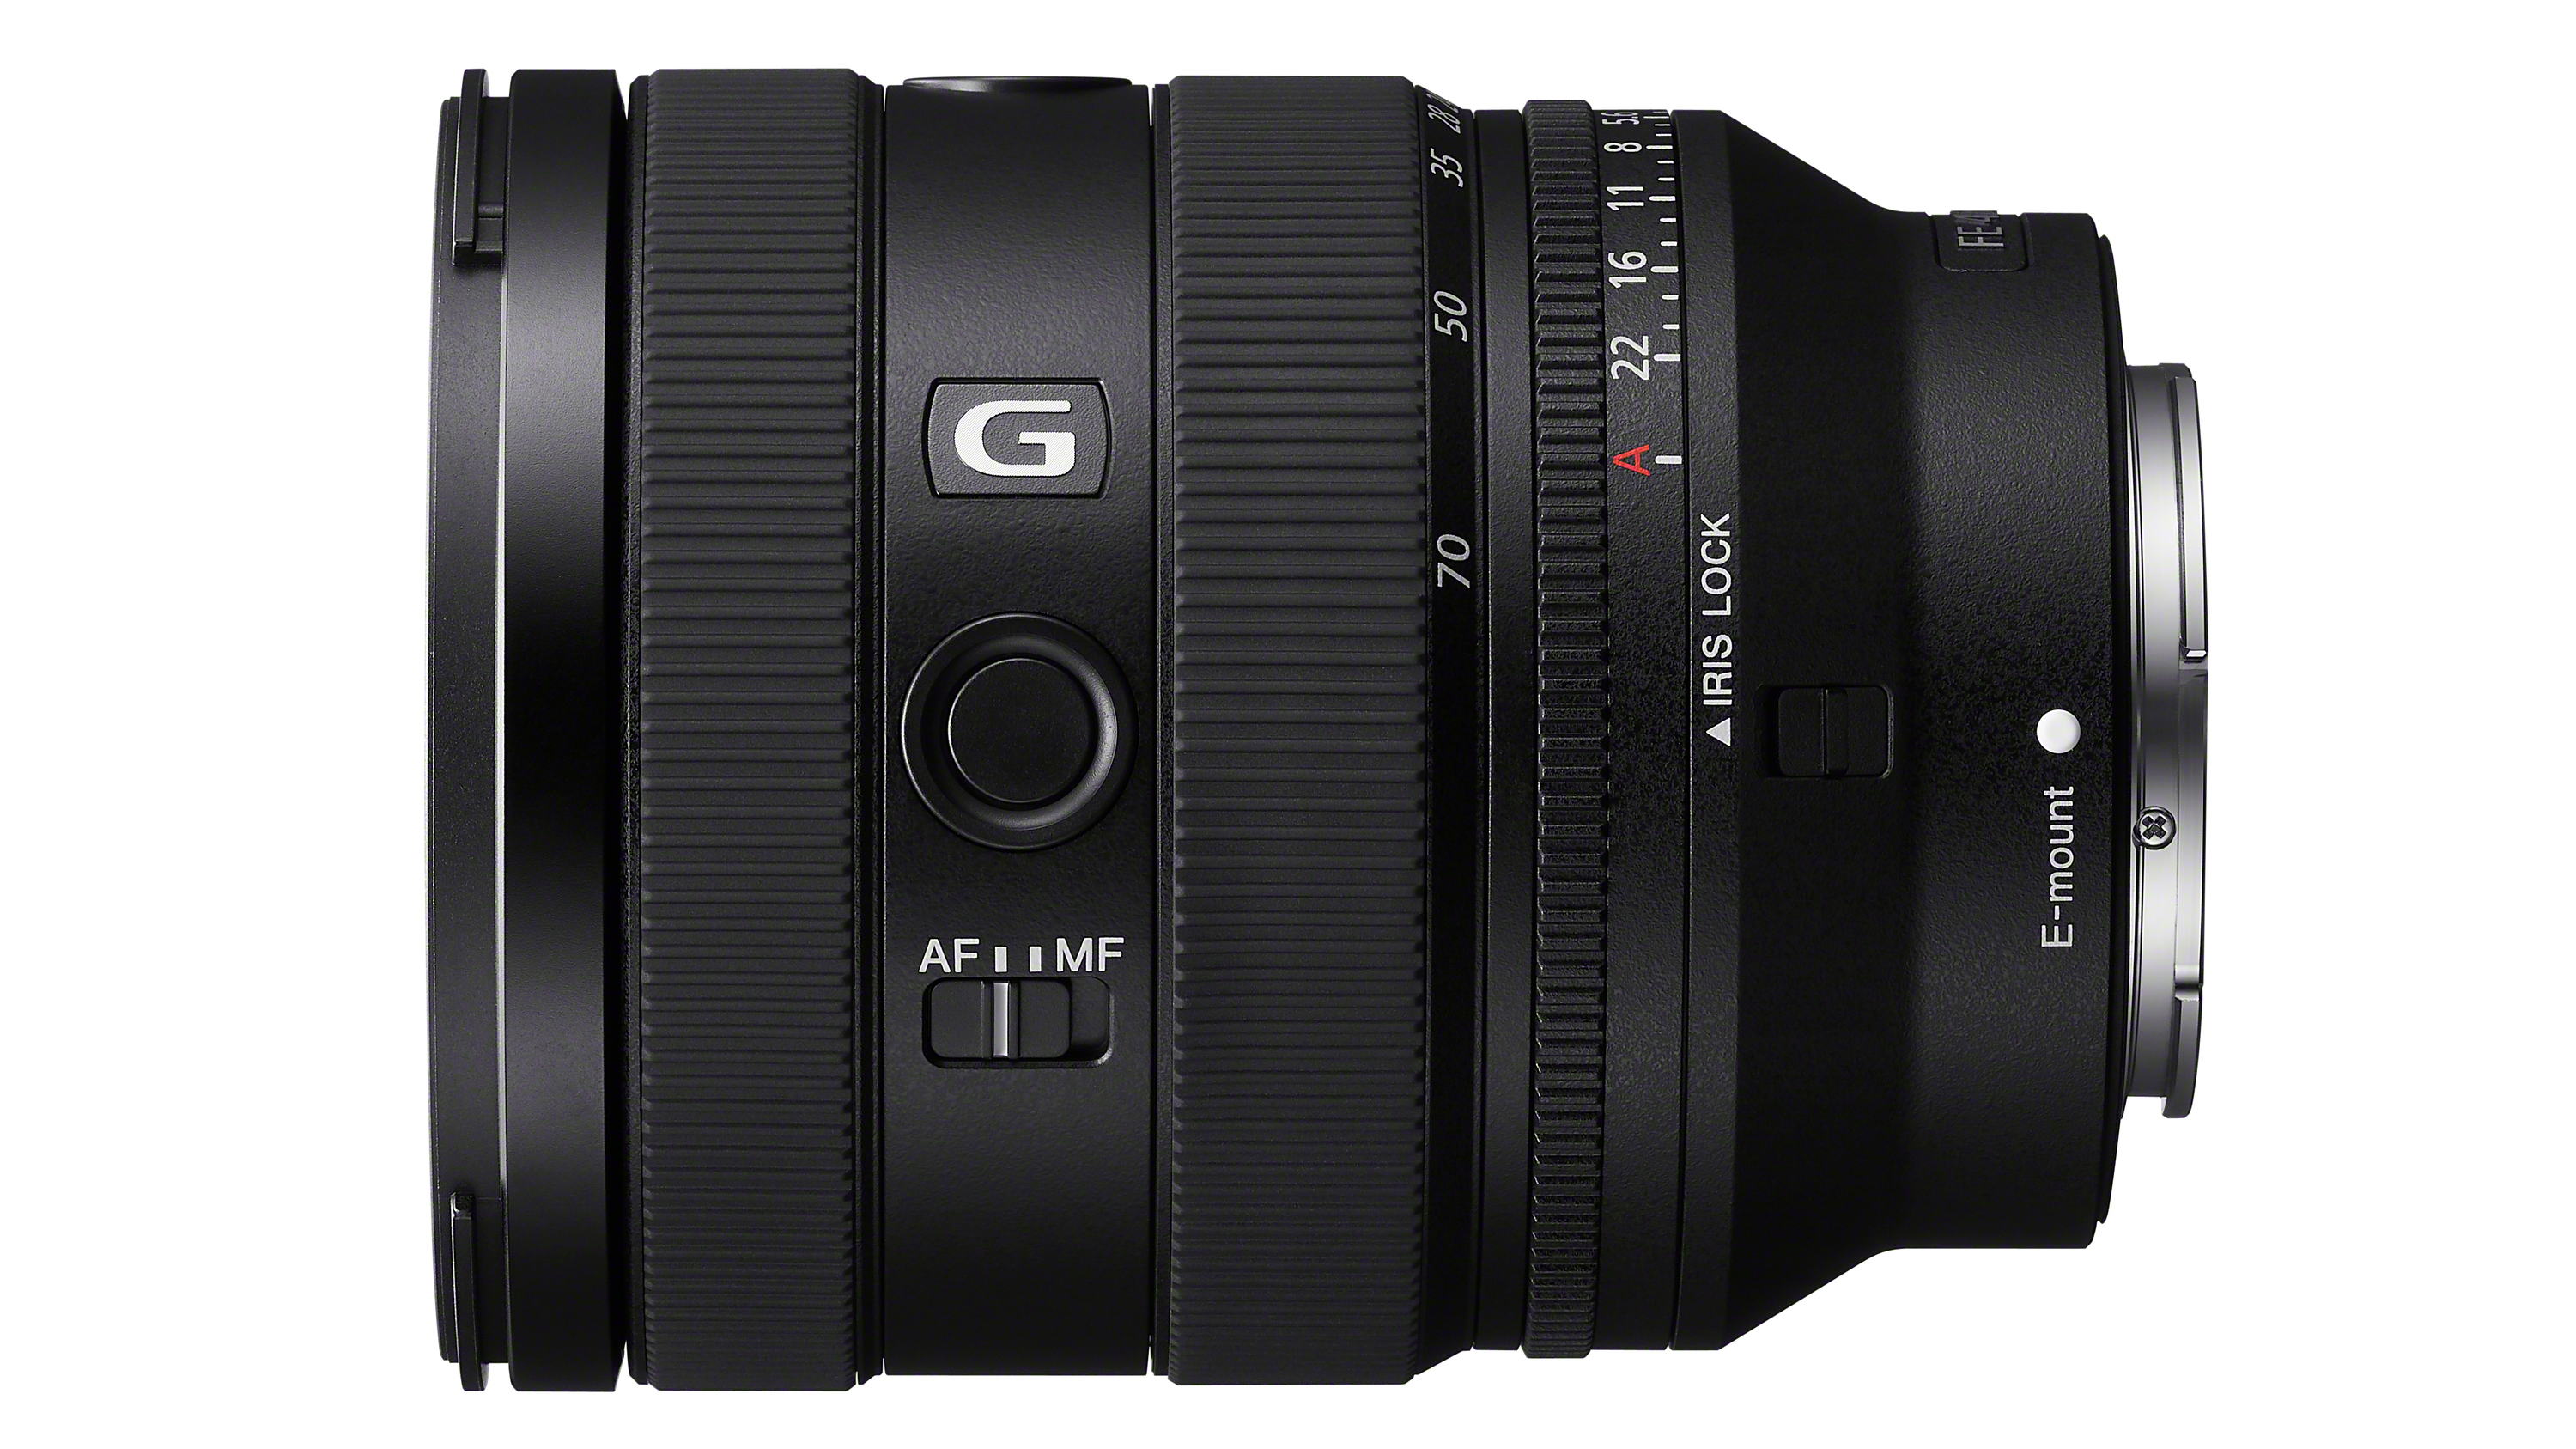 Sony FE 20-70mm F4 G launched as a “new concept” for standard zooms